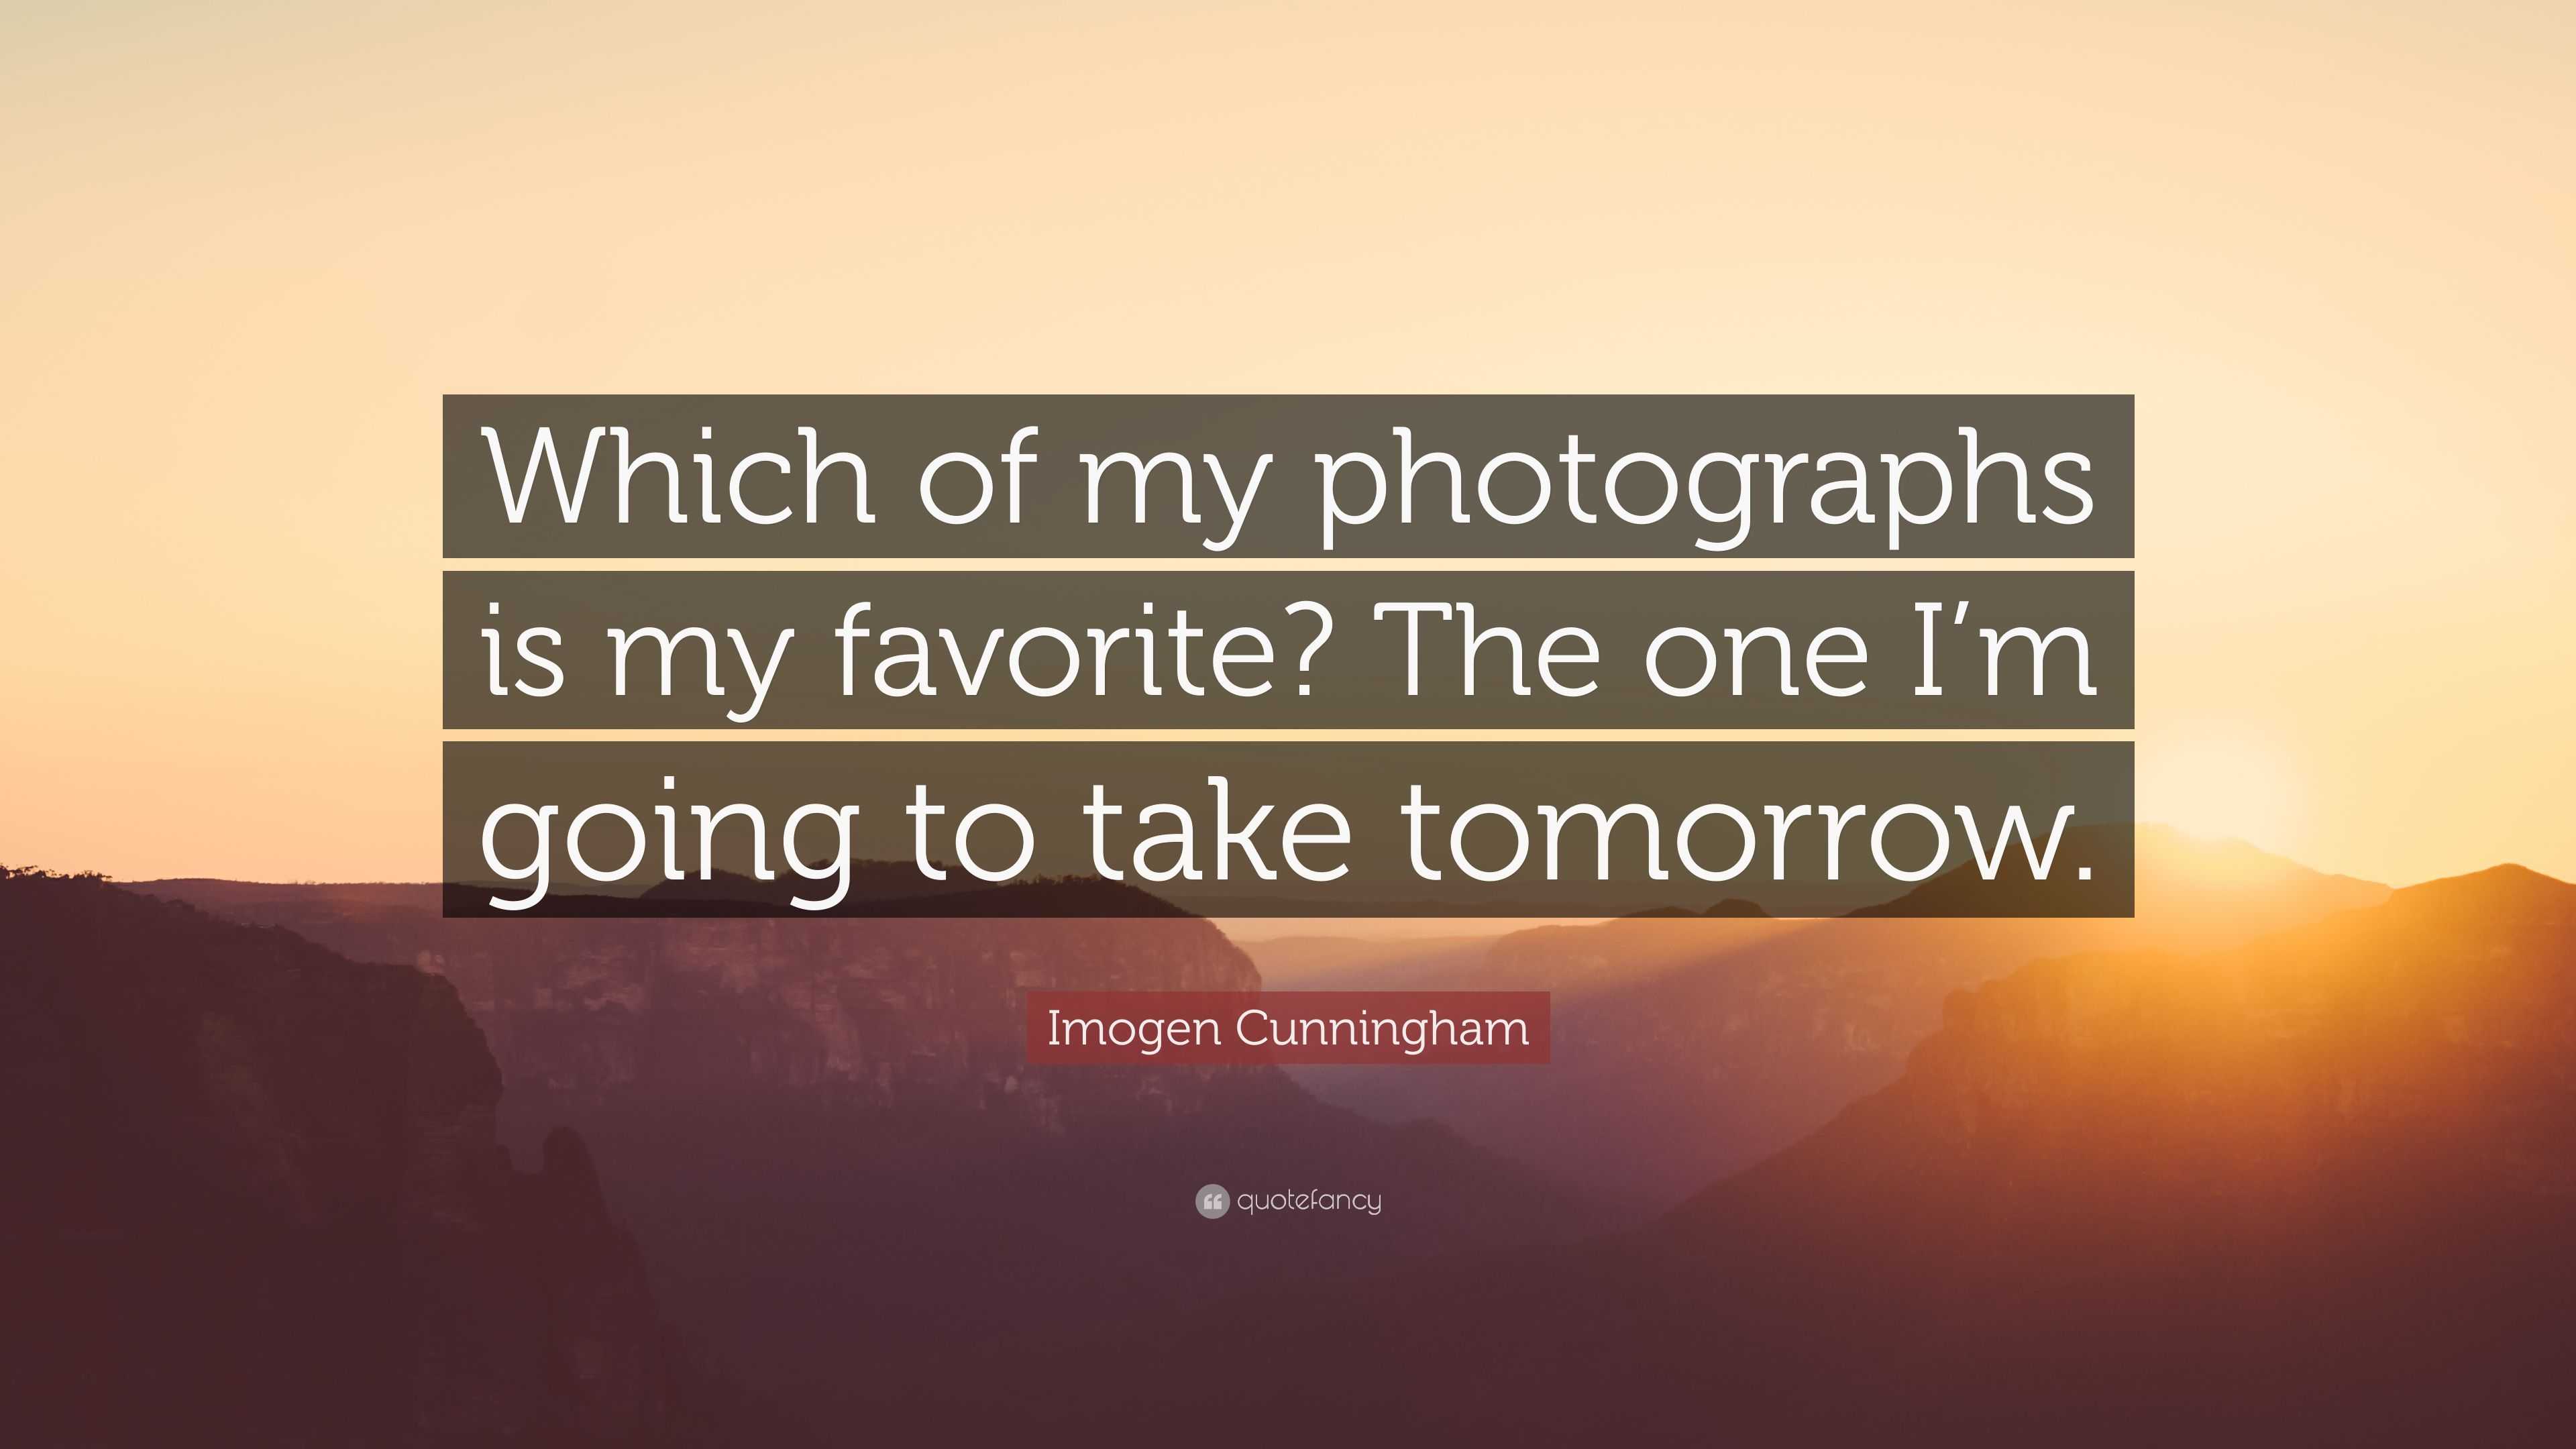 Imogen Cunningham Quote: “Which of my photographs is my favorite? The ...